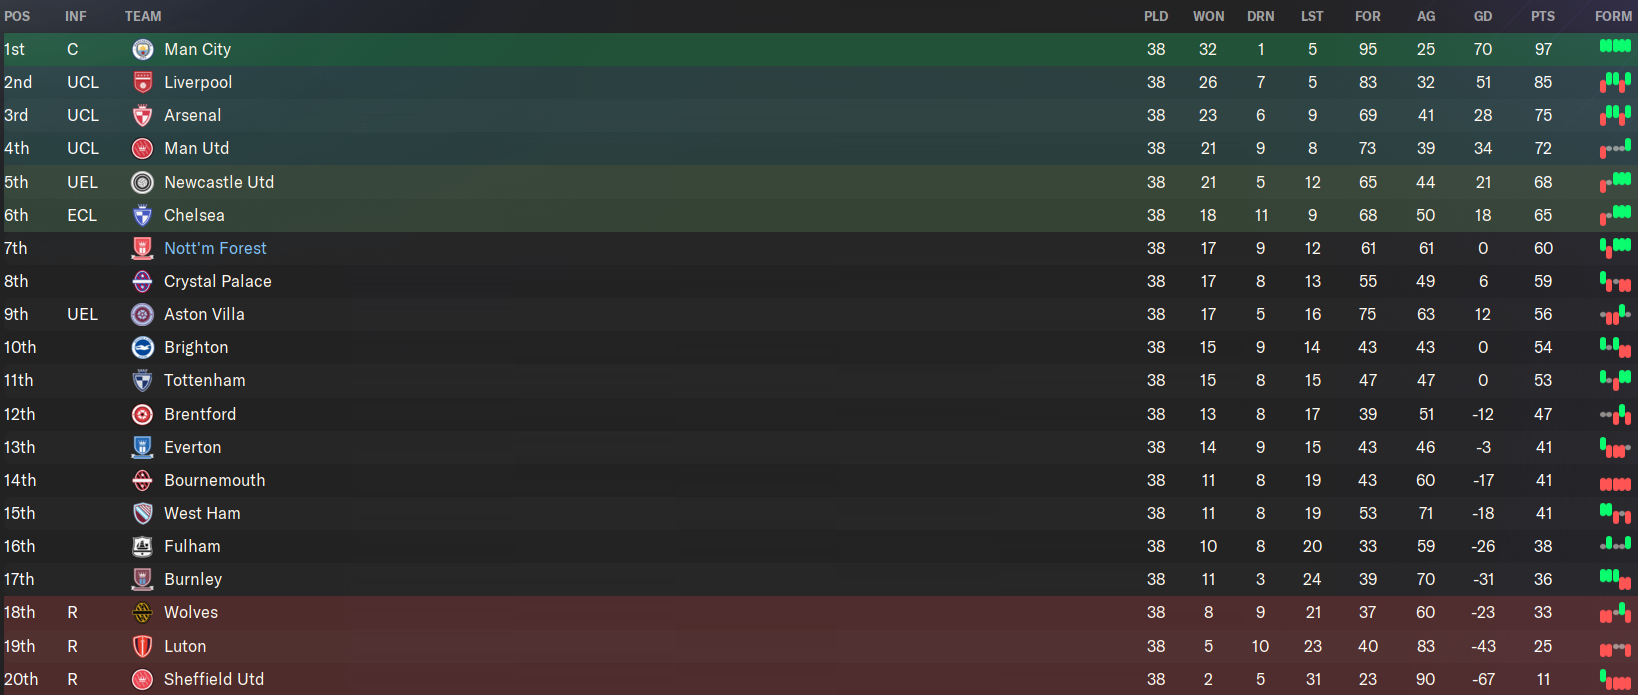 Nottingham Forest FM24 first season results